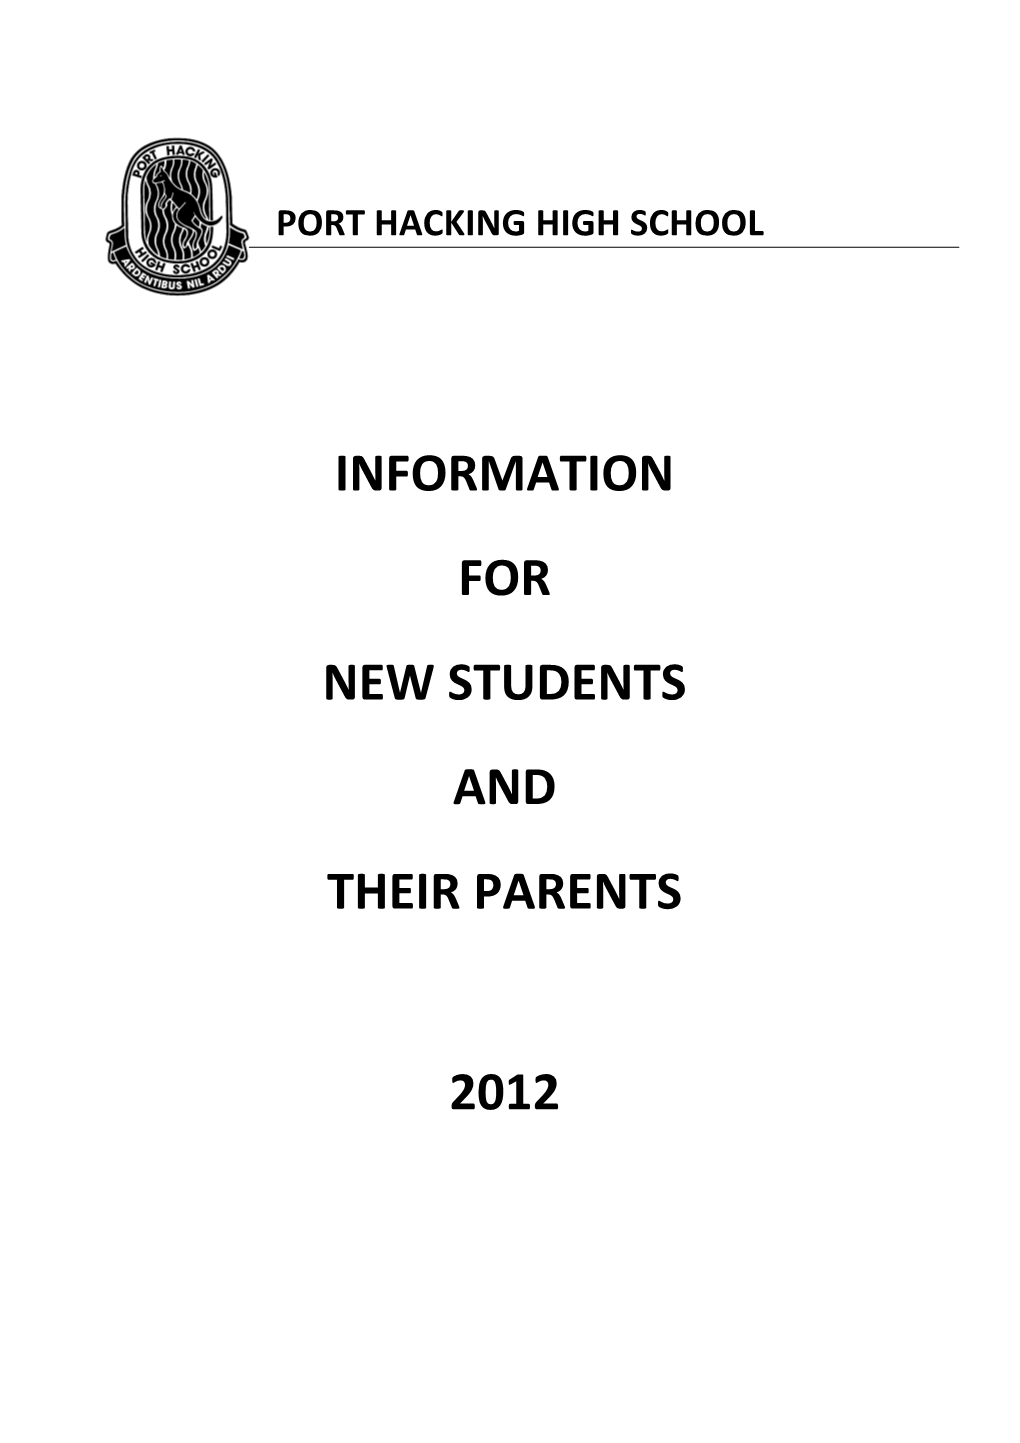 Information for New Students and Their Parents